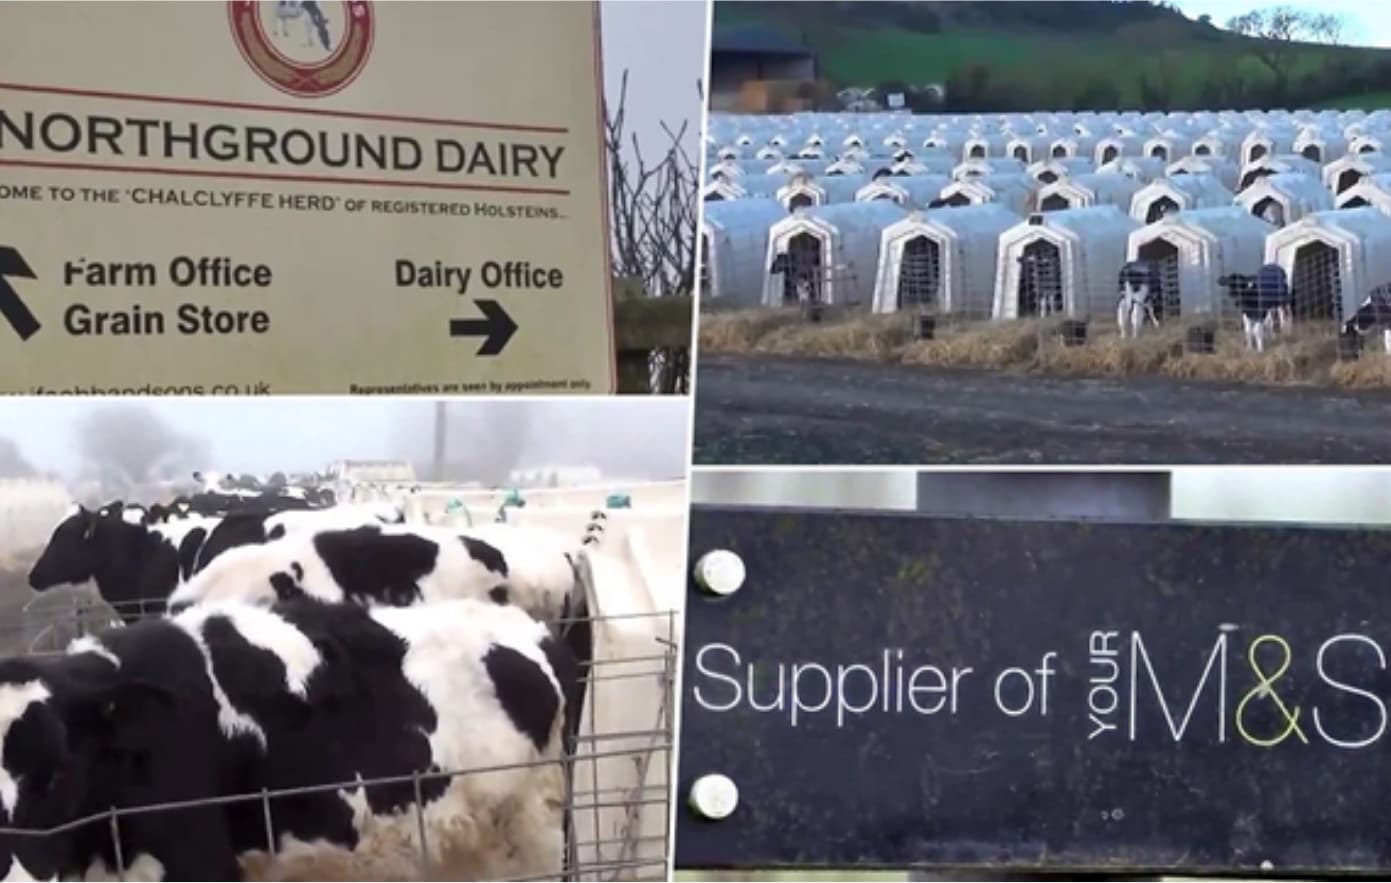 Animal welfare issues at M&S 'trusted' dairy farms, calves in small pens, cows huddled in small yard, wire fencing